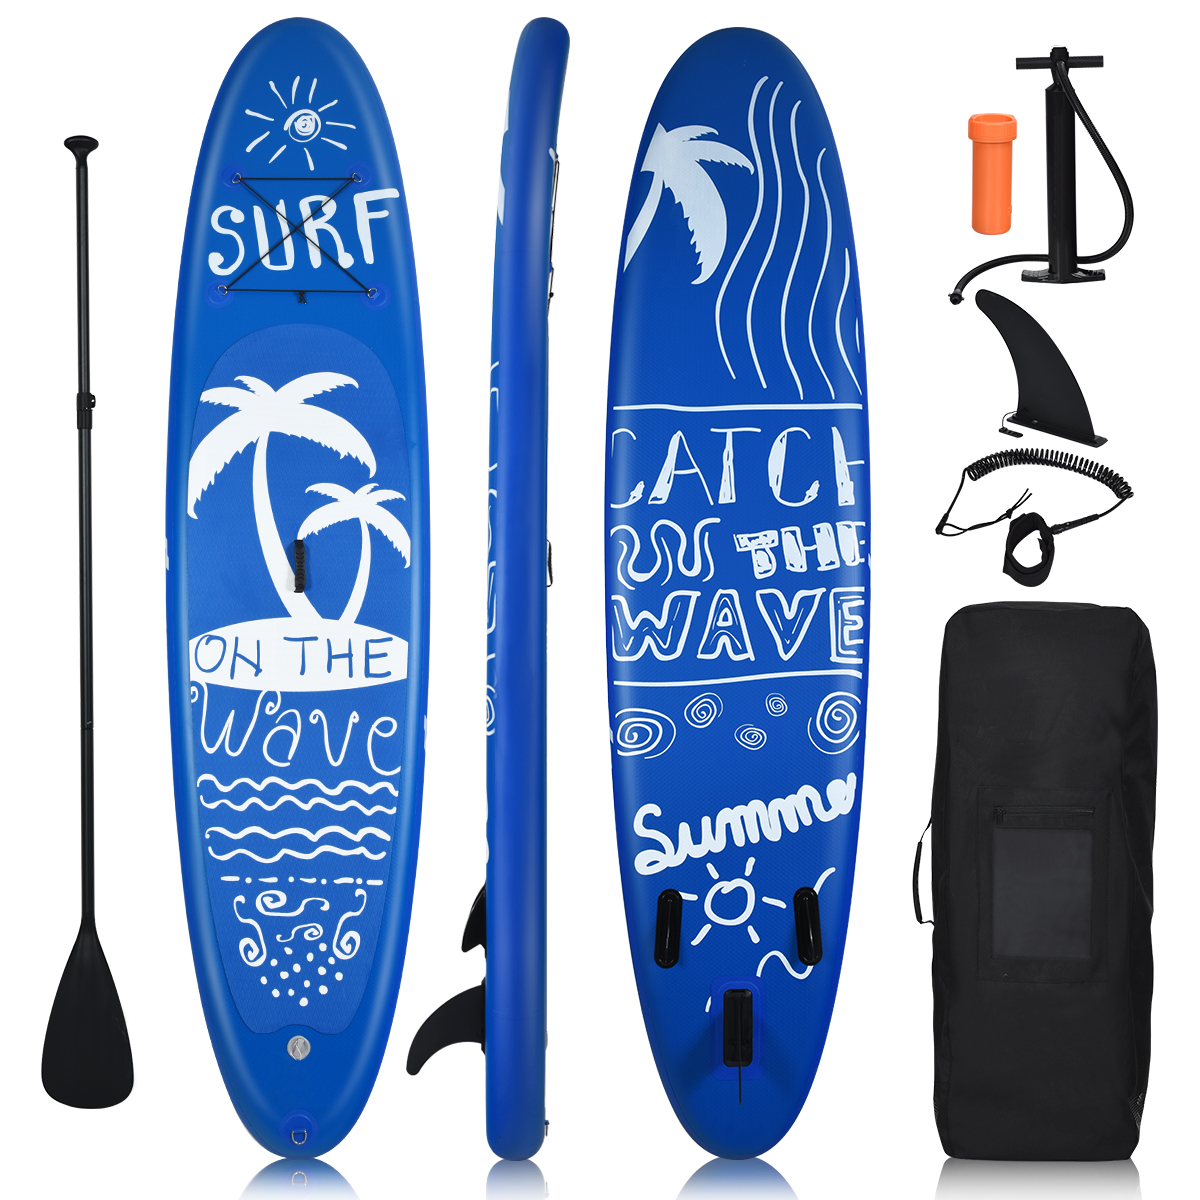 COSTWAY Board Blau Up Paddle, Stand SUP